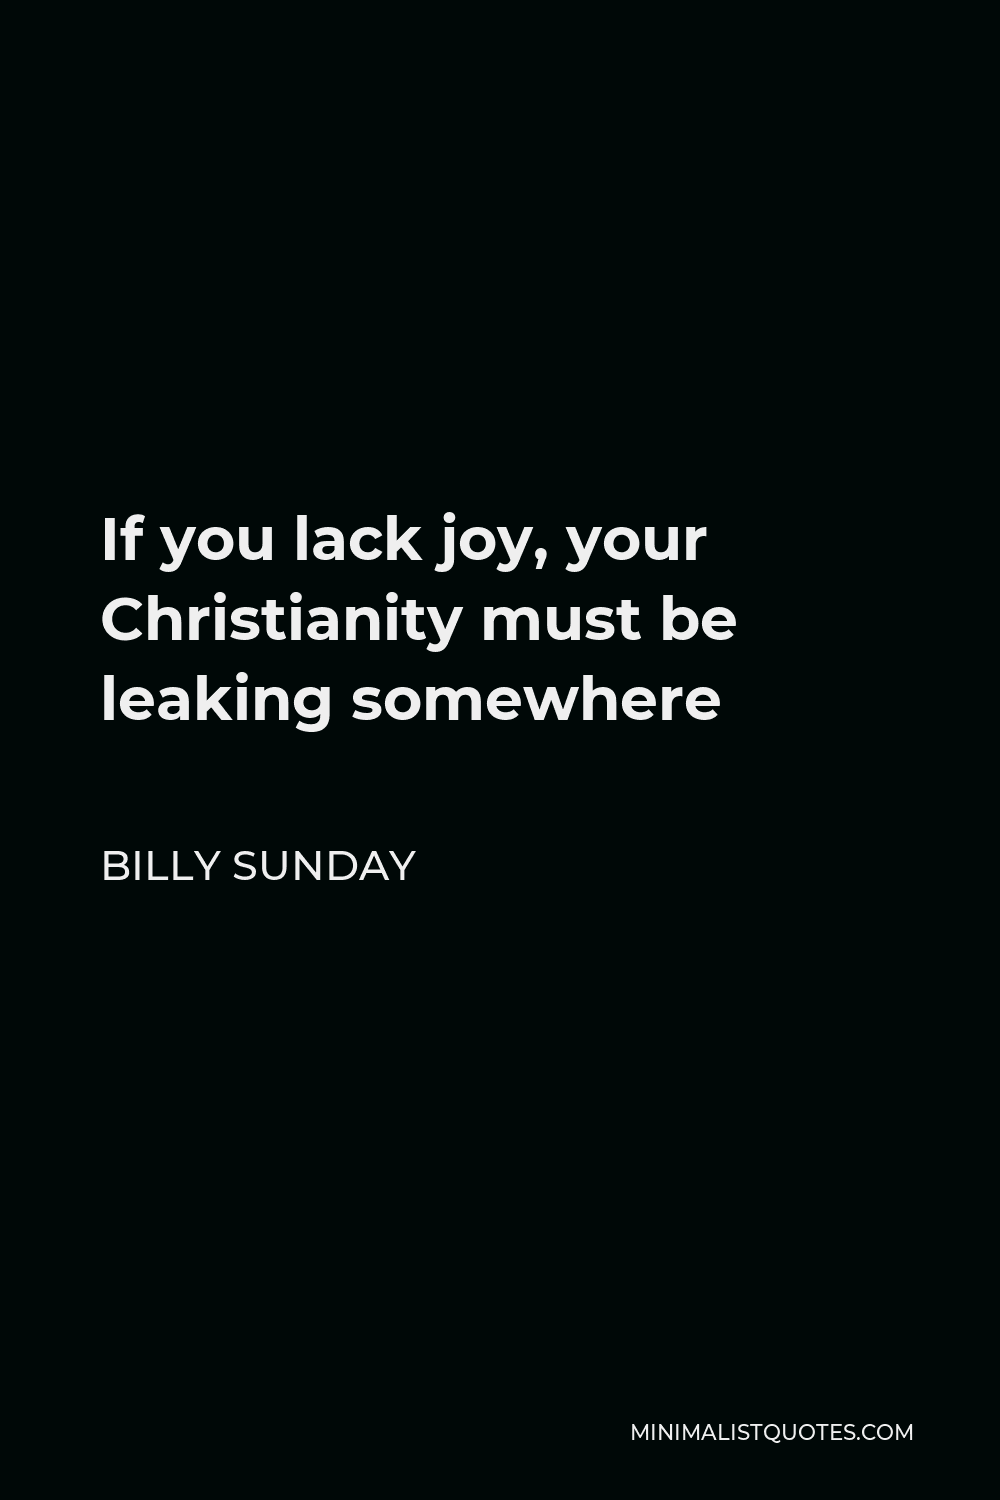 Billy Sunday Quote - If you lack joy, your Christianity must be leaking somewhere